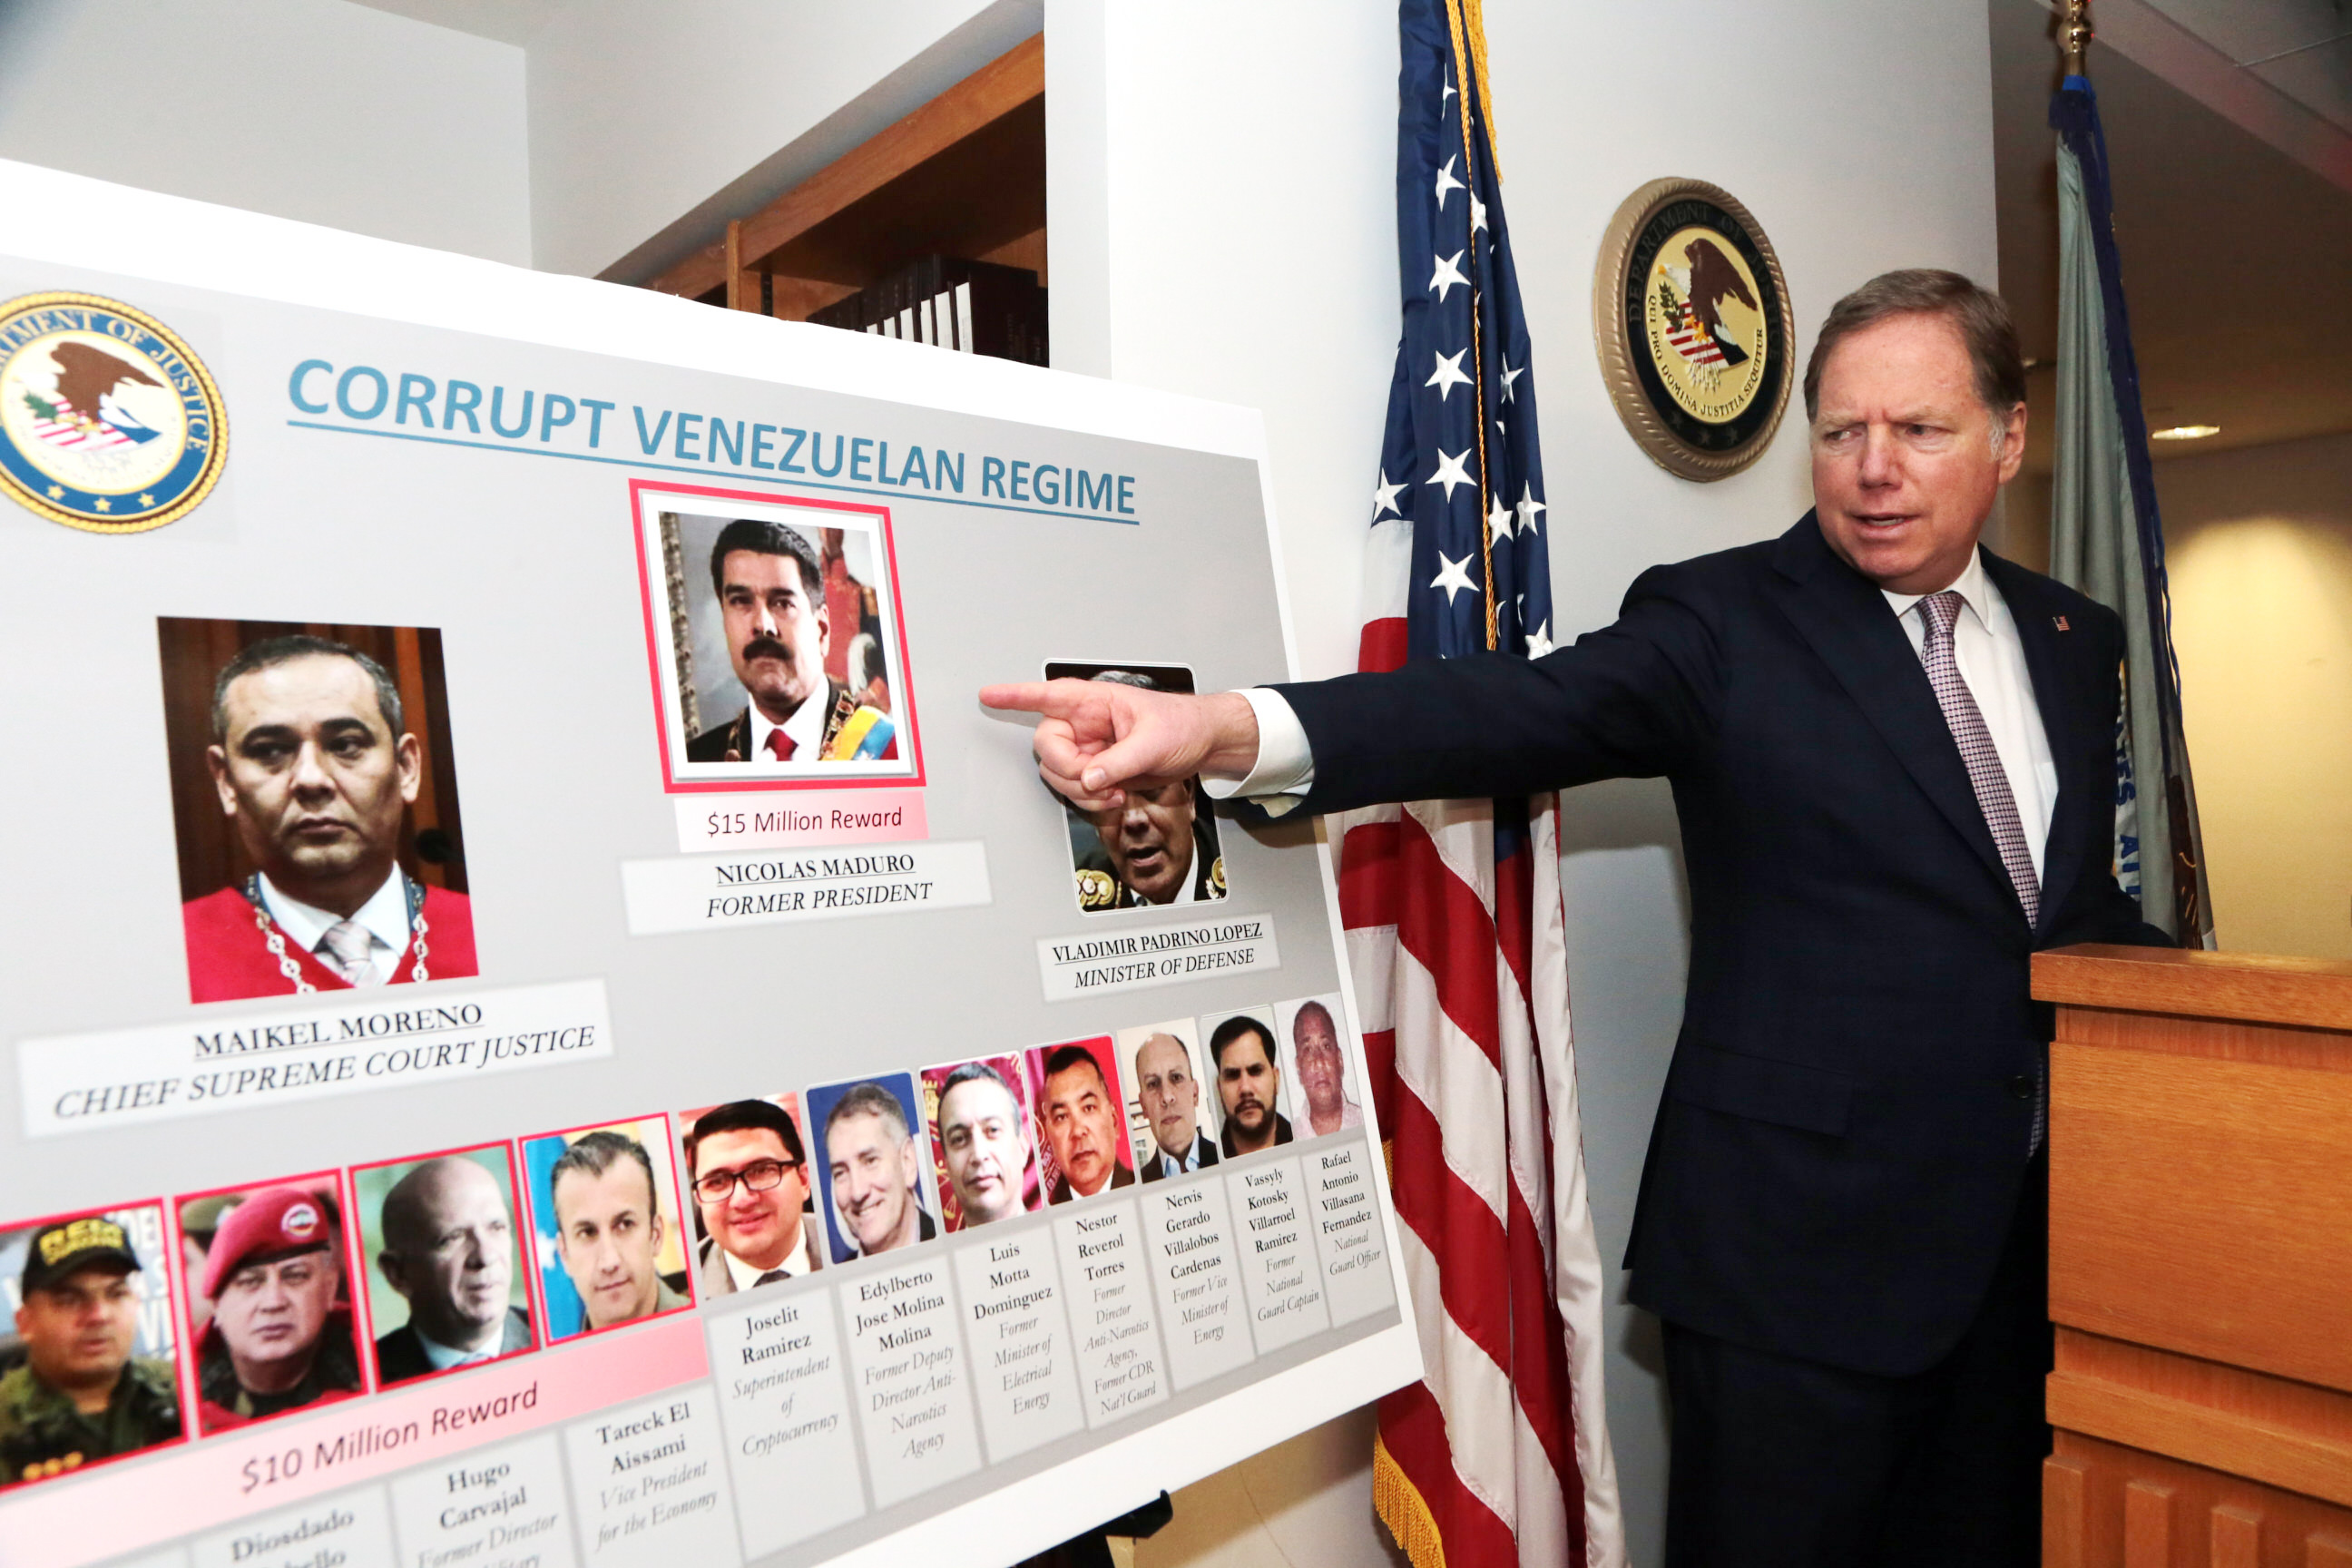 PHOTO: U.S. Attorney Geoffrey Berman of the Southern District of New York announced drug charges against Venezuela's Nicolas Maduro and other Venezuelan government officials, in New York, March 26, 2020.